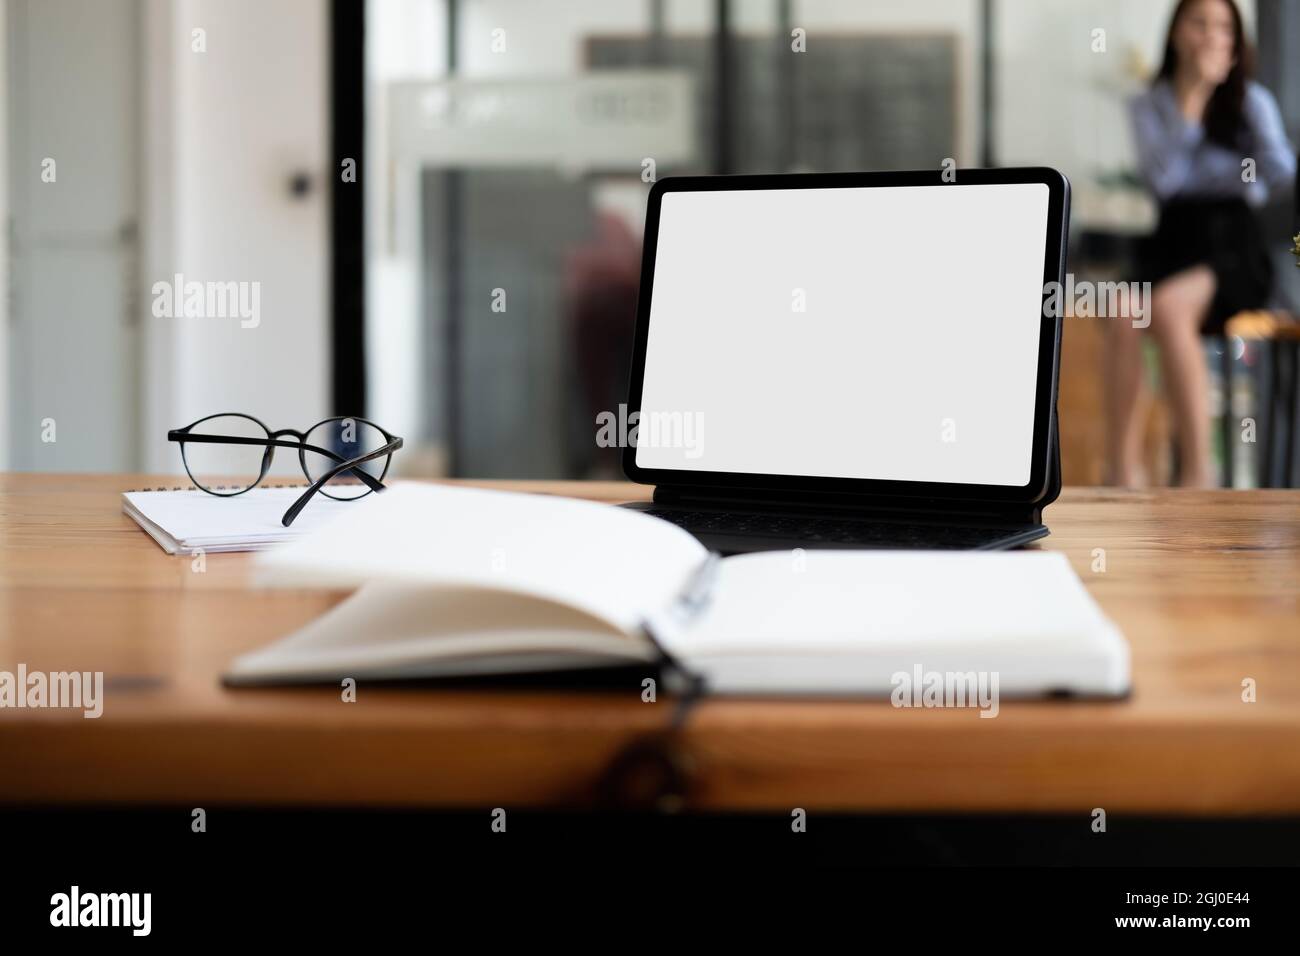 Shot of digital tablet with blank white screen, keyboard, cup of coffee on workspace desk Stock Photo